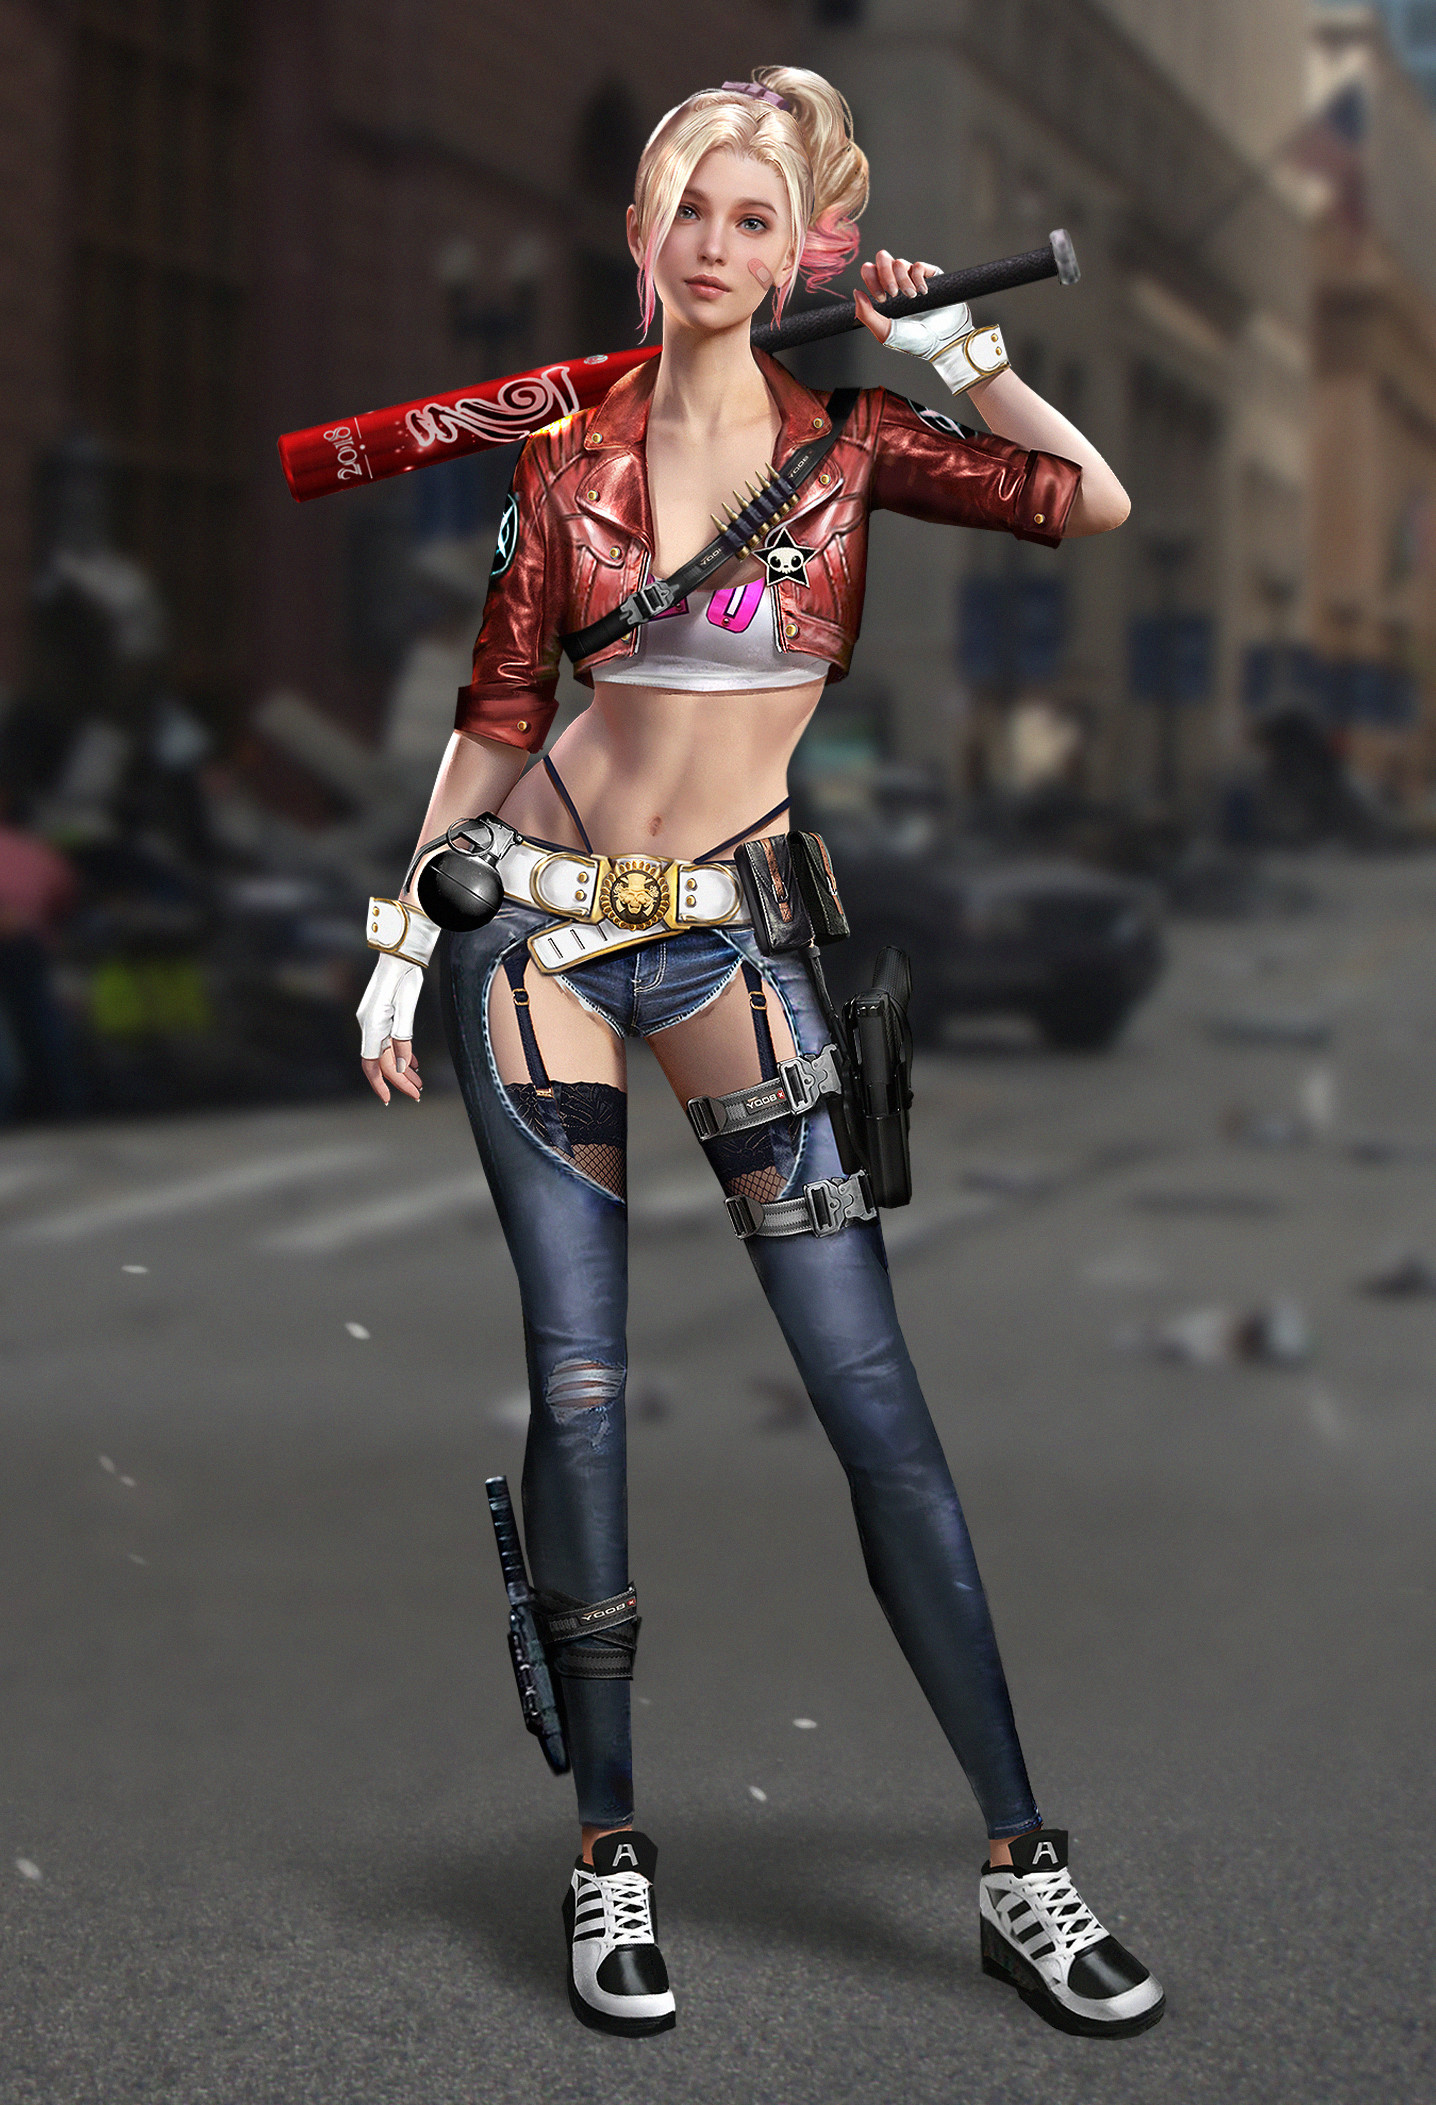 General 1436x2105 Ares (artist) drawing women blonde pink hair ombre hair ponytail curly hair open jacket baseball bat lingerie torn jeans outdoors holster weapon grenades